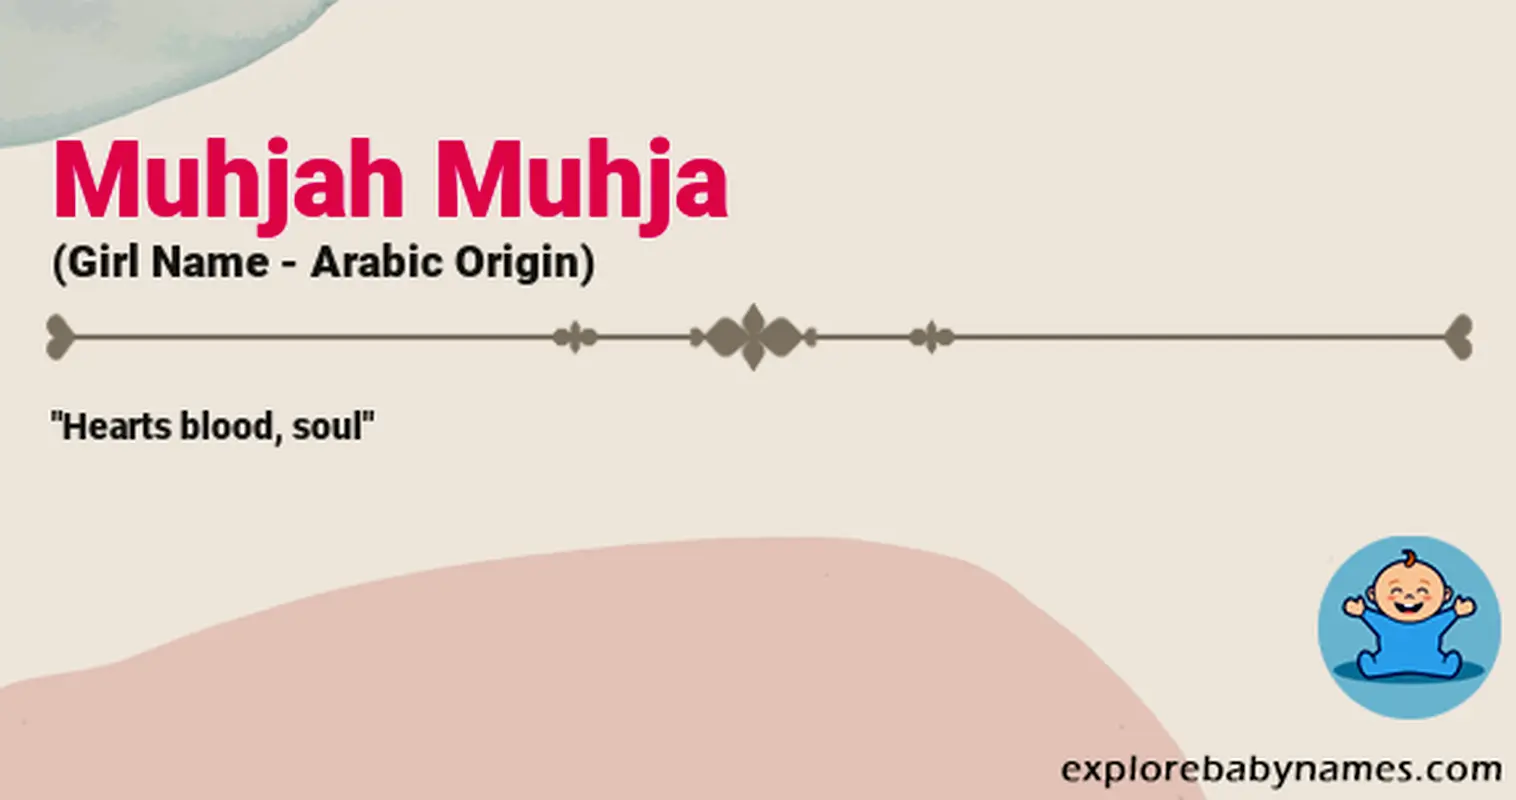 Meaning of Muhjah Muhja